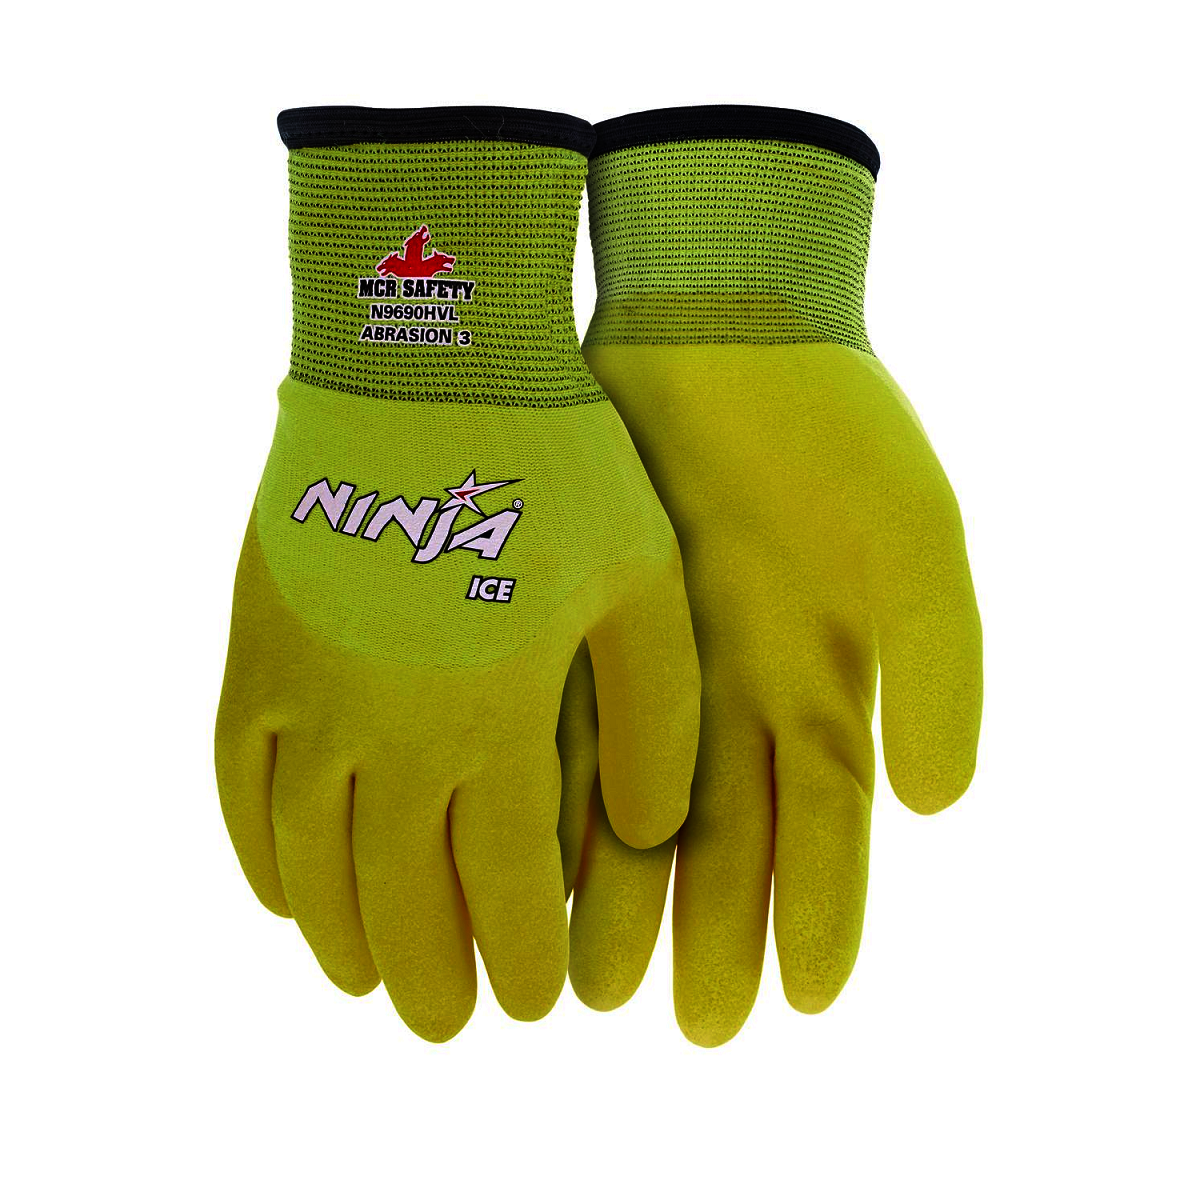 Airgas - MEGN9690HVXXL - MCR Safety Yellow Ninja® ICE Nylon Terry Lined Cold Weather Gloves